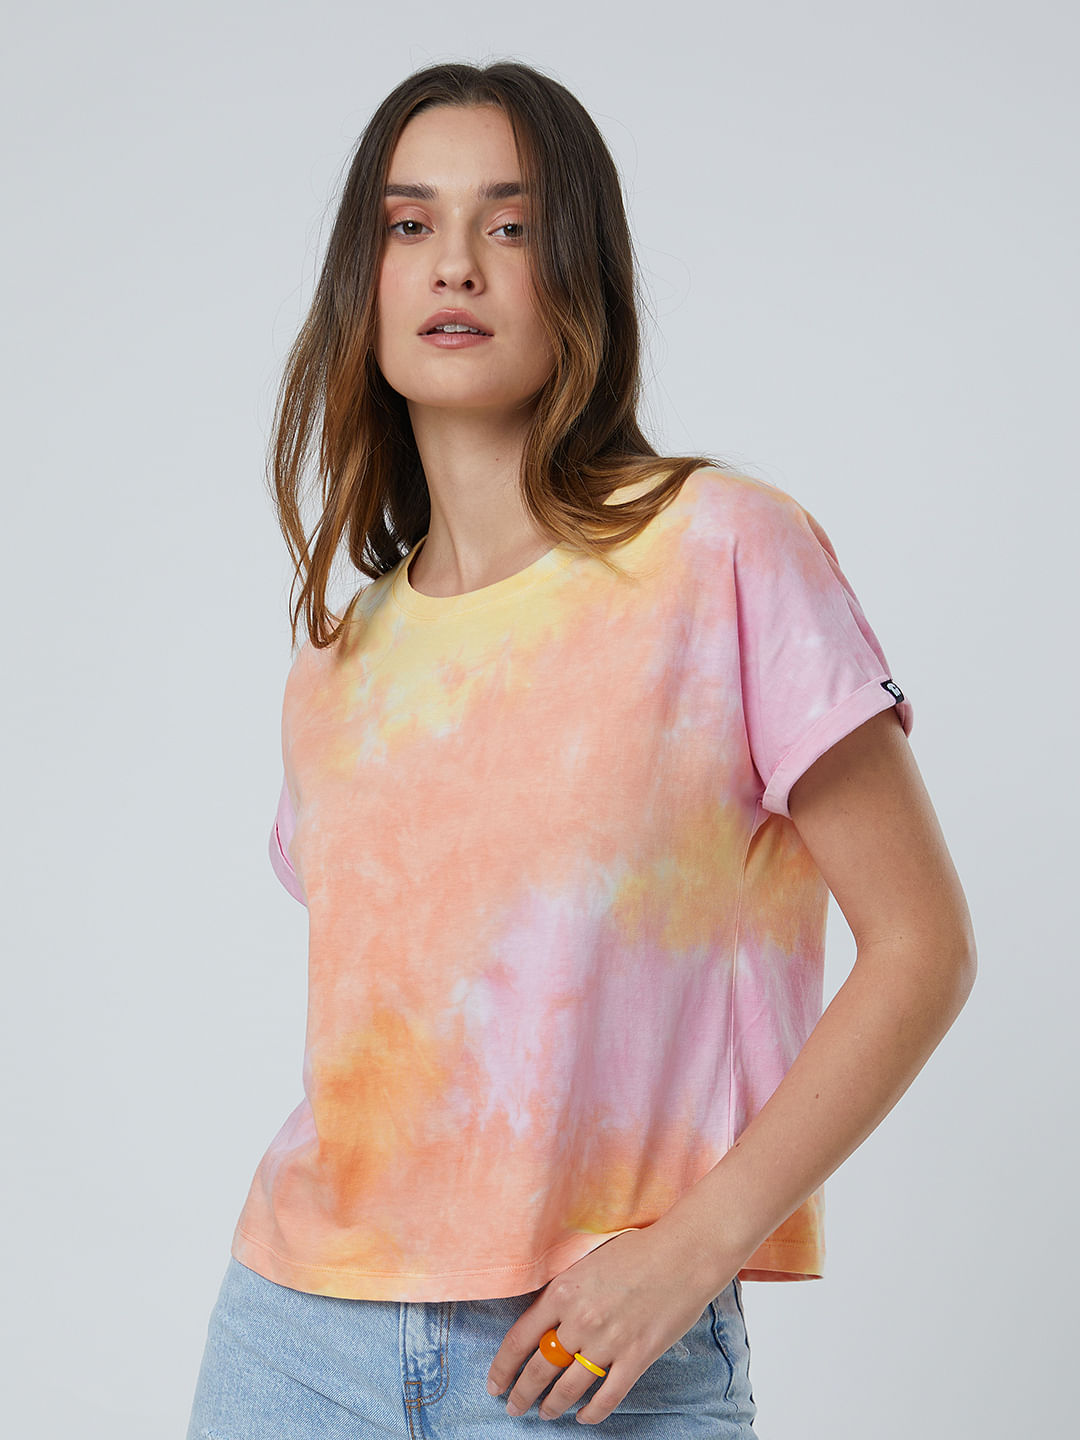 Yskkt Womens Tie Dye 3/4 Sleeve T-Shirt Plus Size Round Neck High Low Loose Casual Tunic Tops 